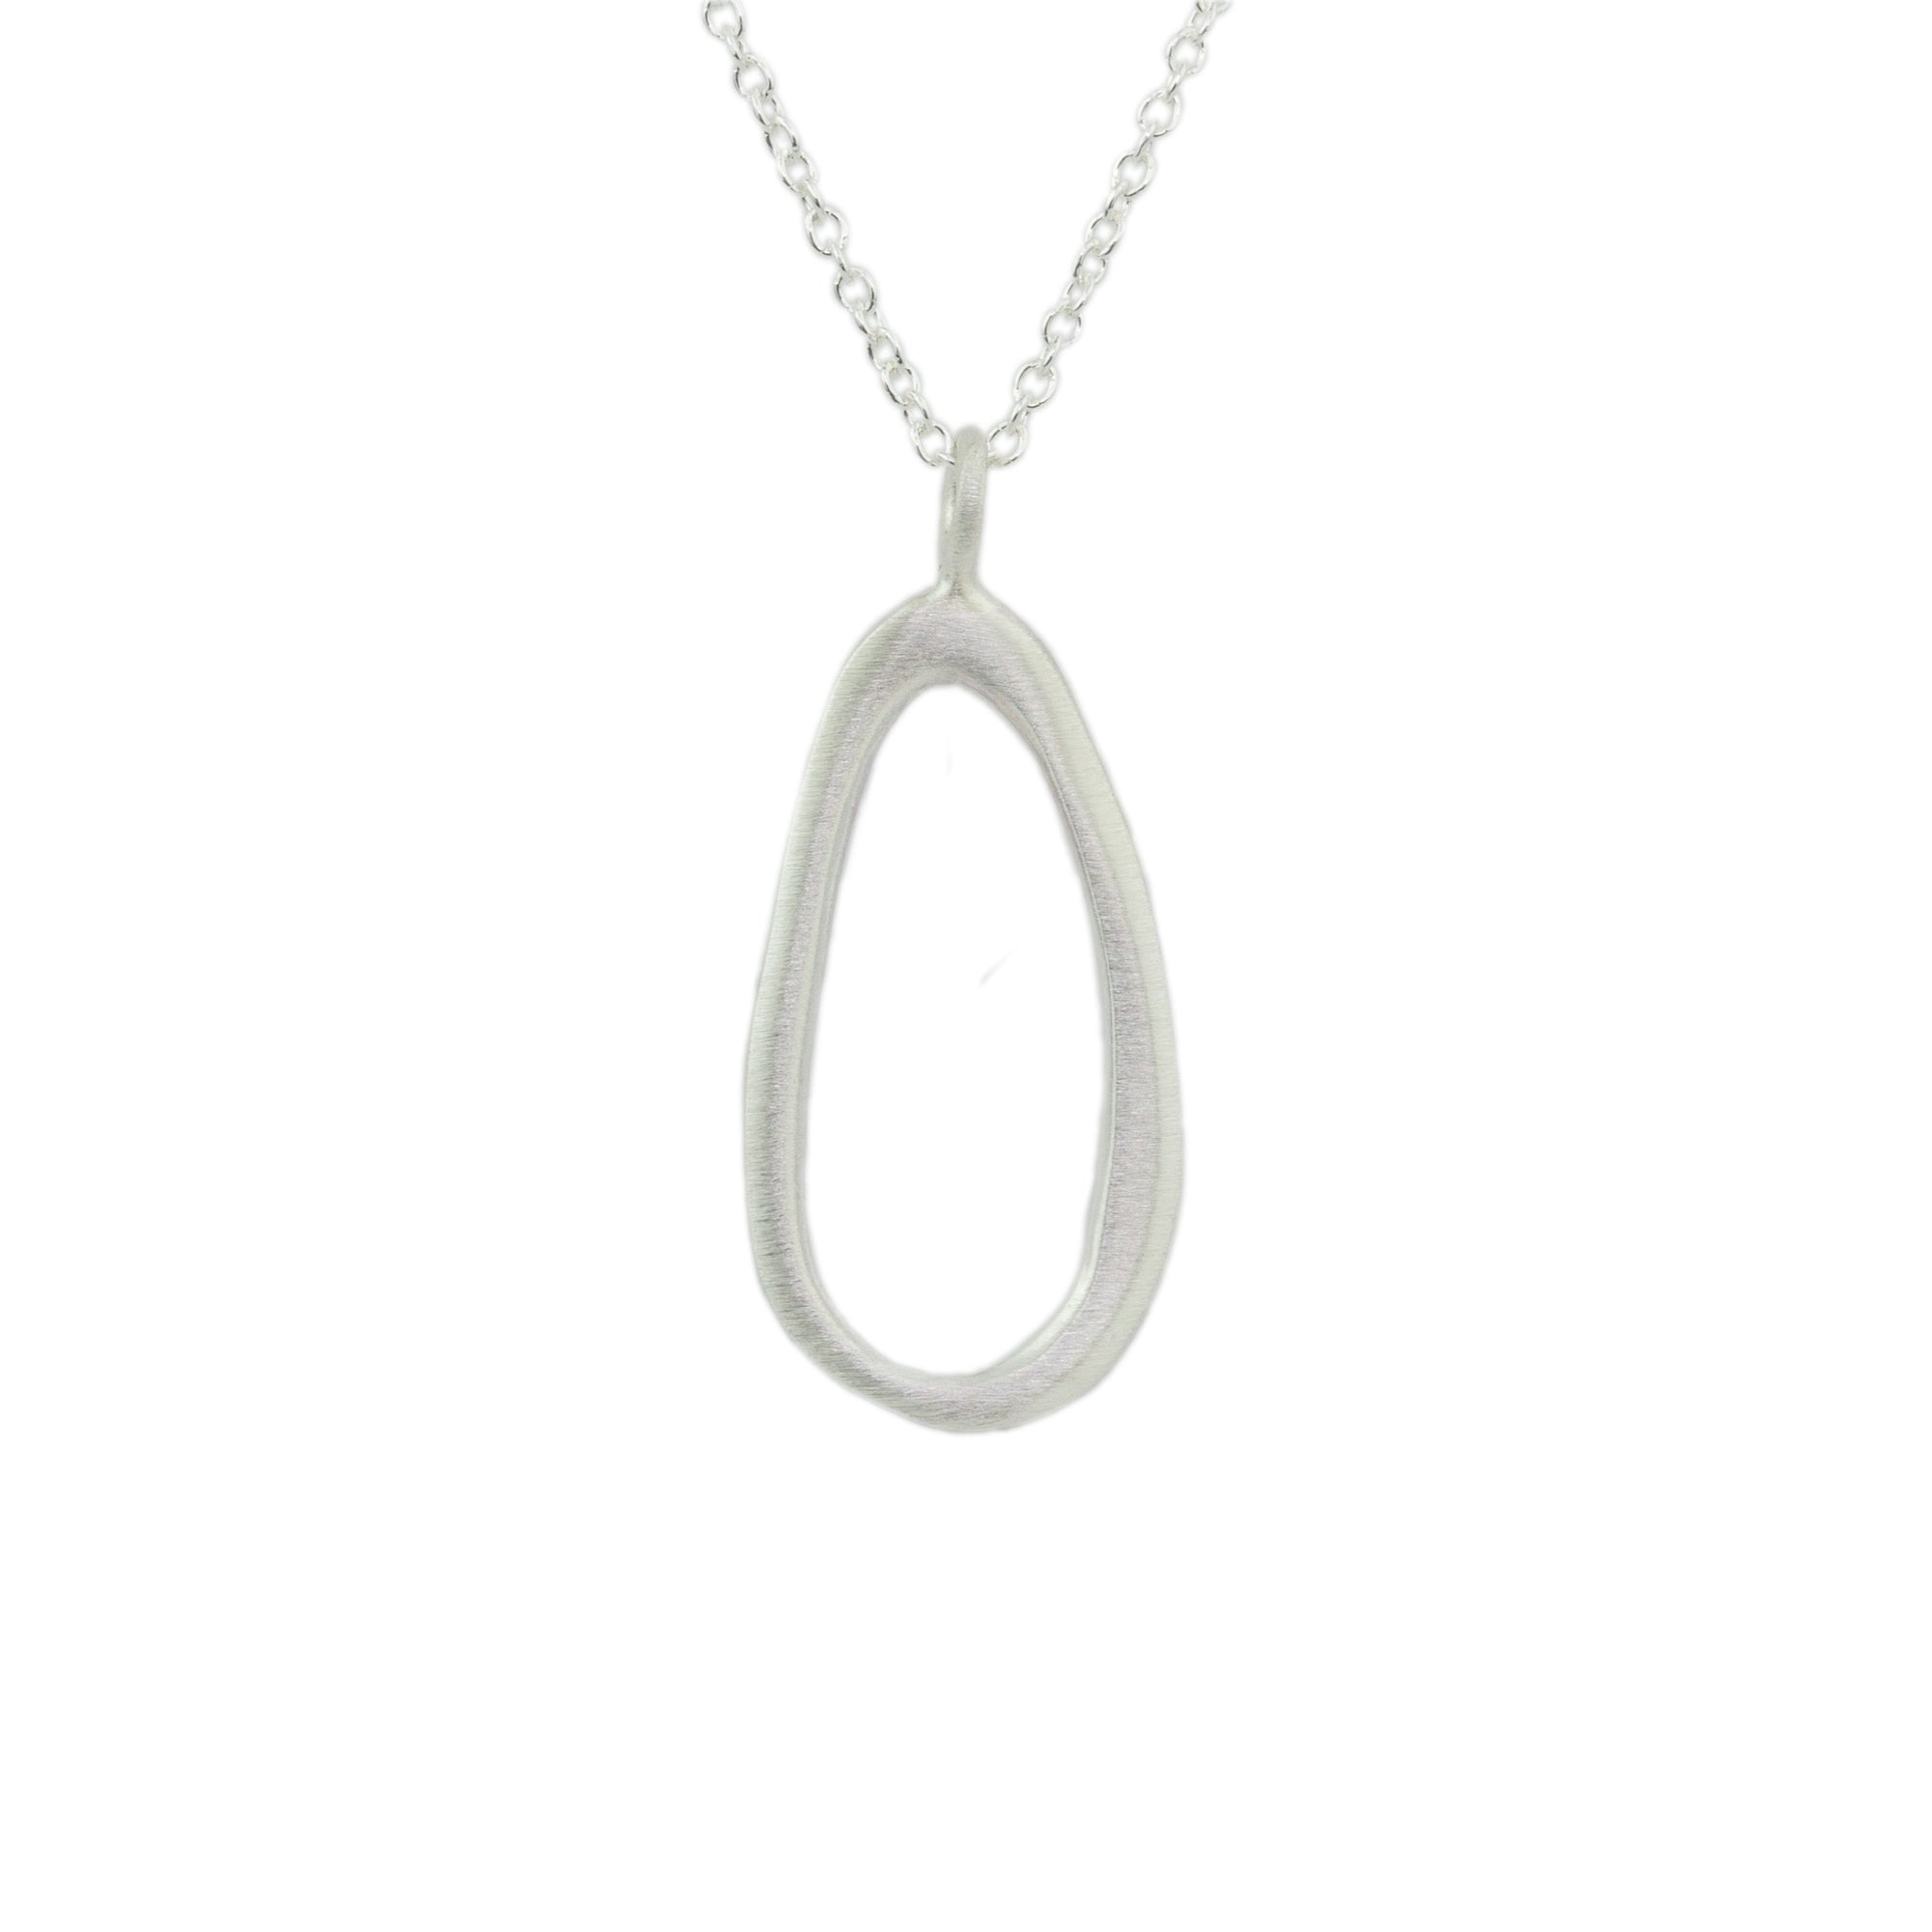 Organic Oval Necklace